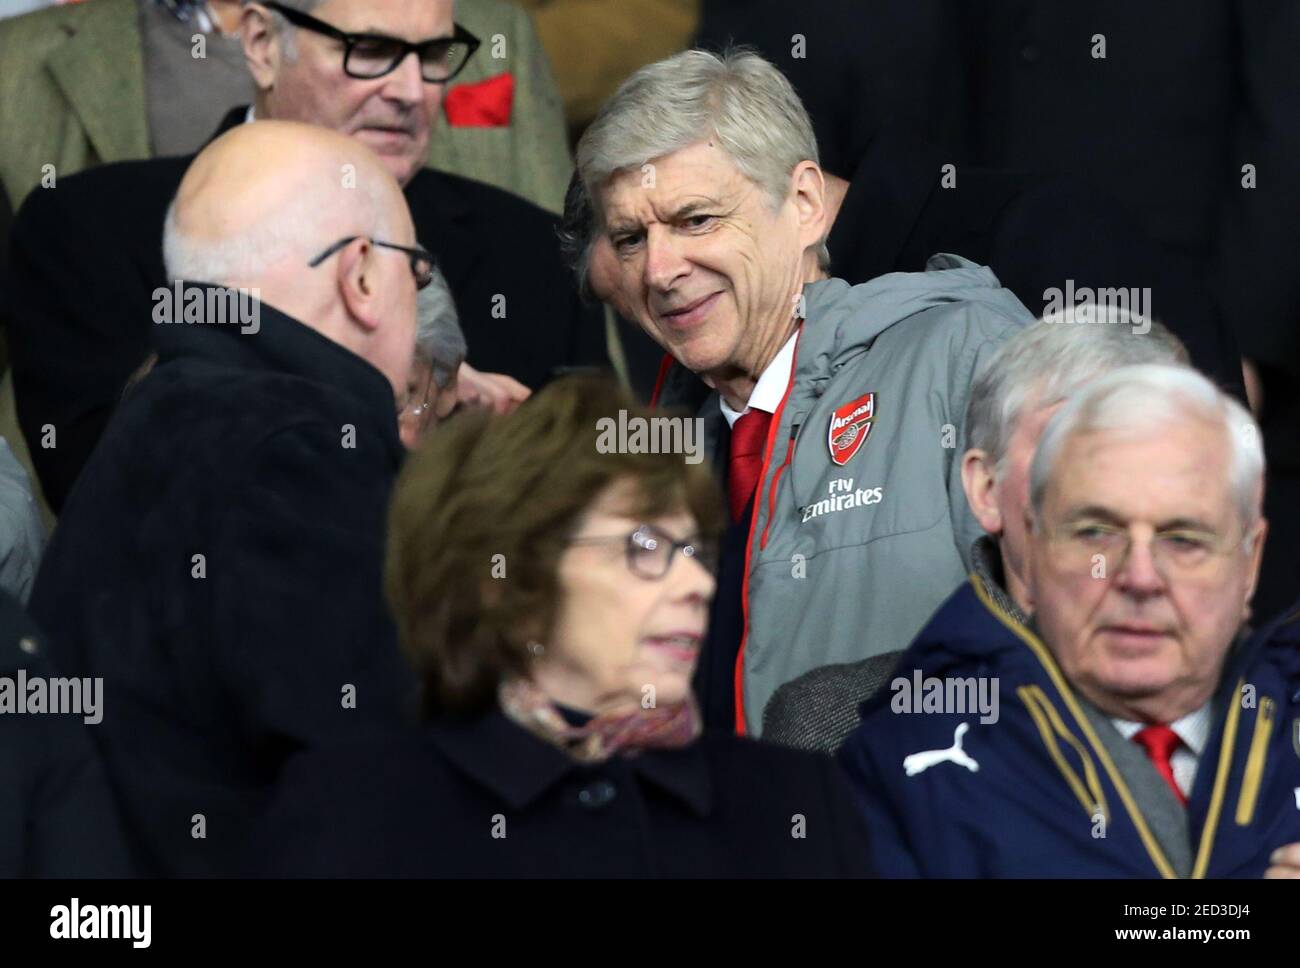 Britain Football Soccer - Southampton v Arsenal - FA Cup Fourth Round - St Mary's Stadium - 28/1/17 Arsenal manager Arsene Wenger in the stands Reuters / Paul Hackett Livepic EDITORIAL USE ONLY. No use with unauthorized audio, video, data, fixture lists, club/league logos or 'live' services. Online in-match use limited to 45 images, no video emulation. No use in betting, games or single club/league/player publications.  Please contact your account representative for further details. Stock Photo